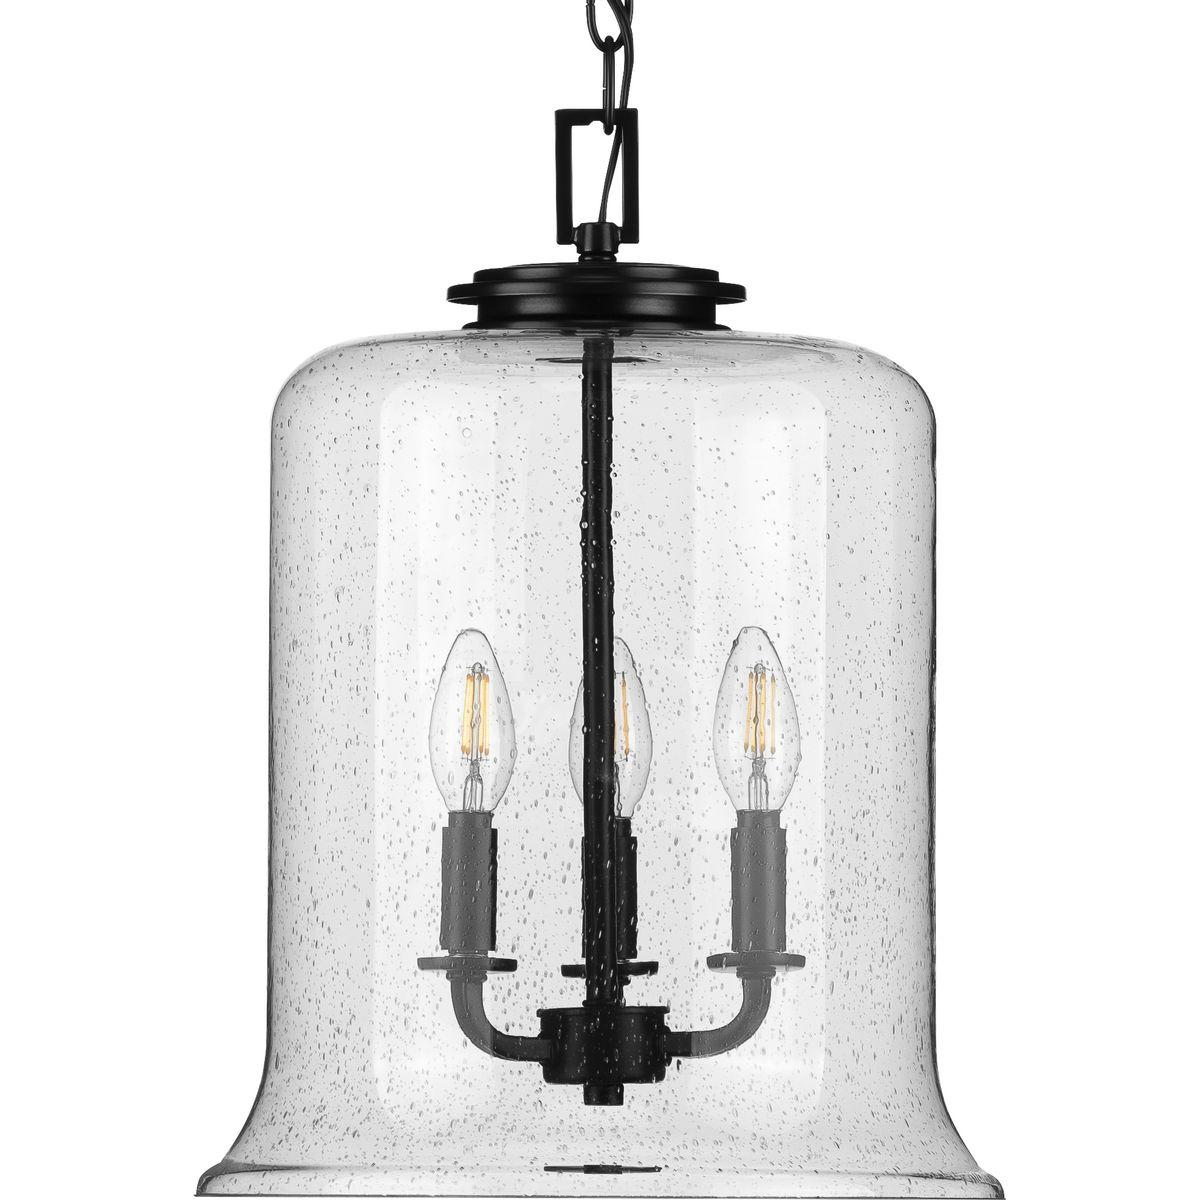 Hubbell P500239-031 Immerse yourself in a home atmosphere primed for relaxation and inspired thinking with the beautiful craftsmanship of this pendant. Savor this fresh take on a classic light choice as your gaze traces a sleek stem that extends down from a round ceiling pla